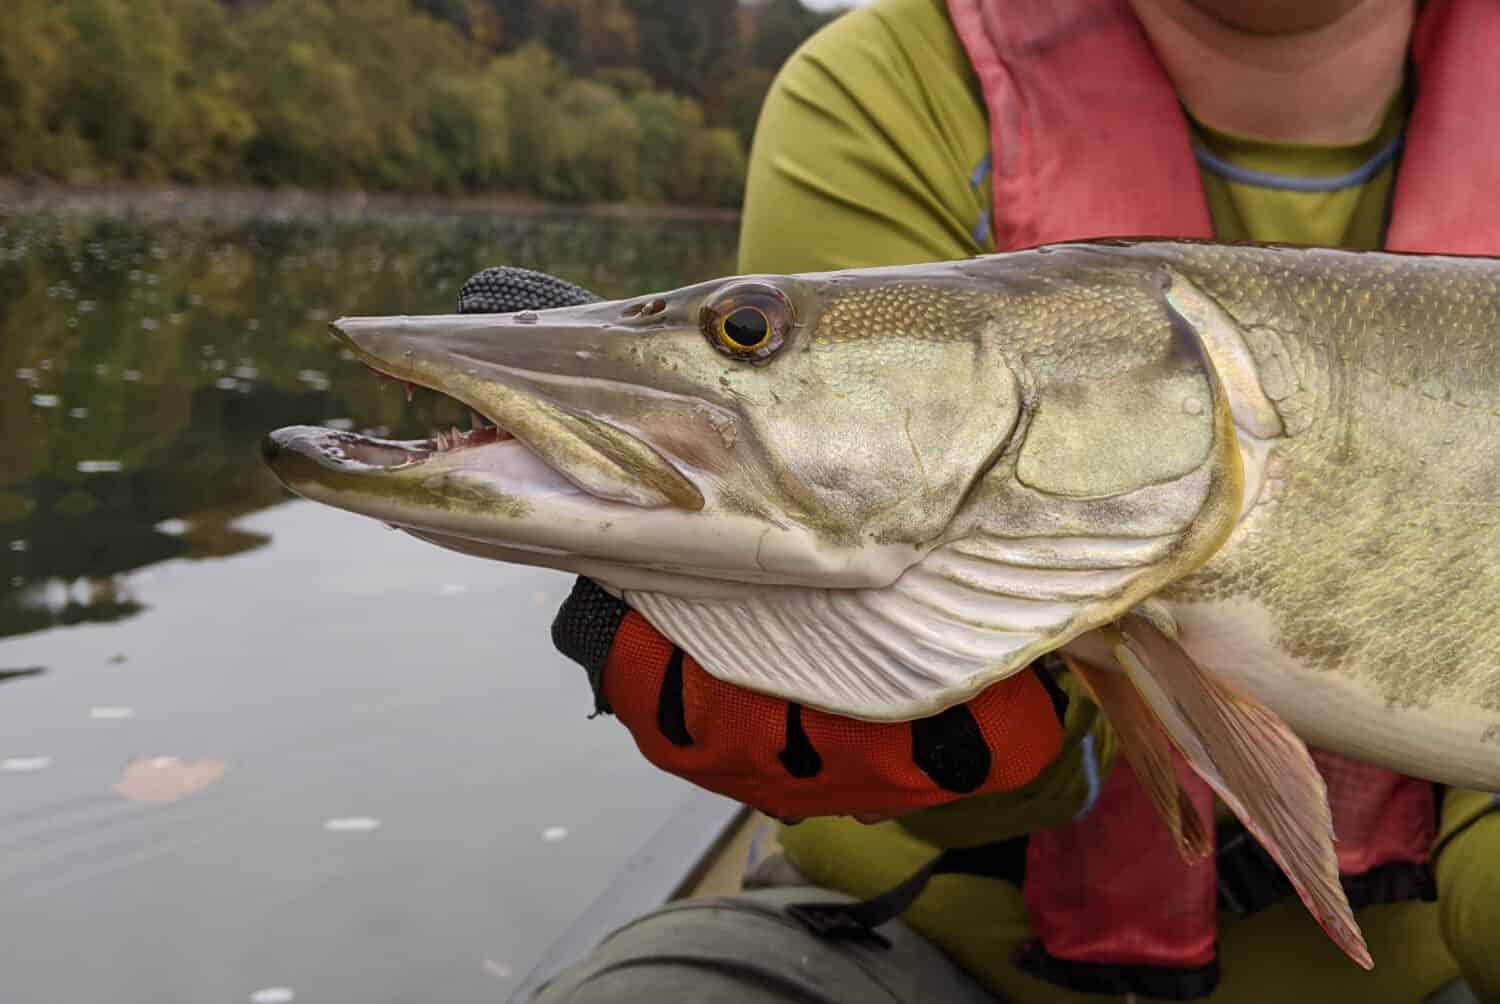 A muskie fish caught by a fisher